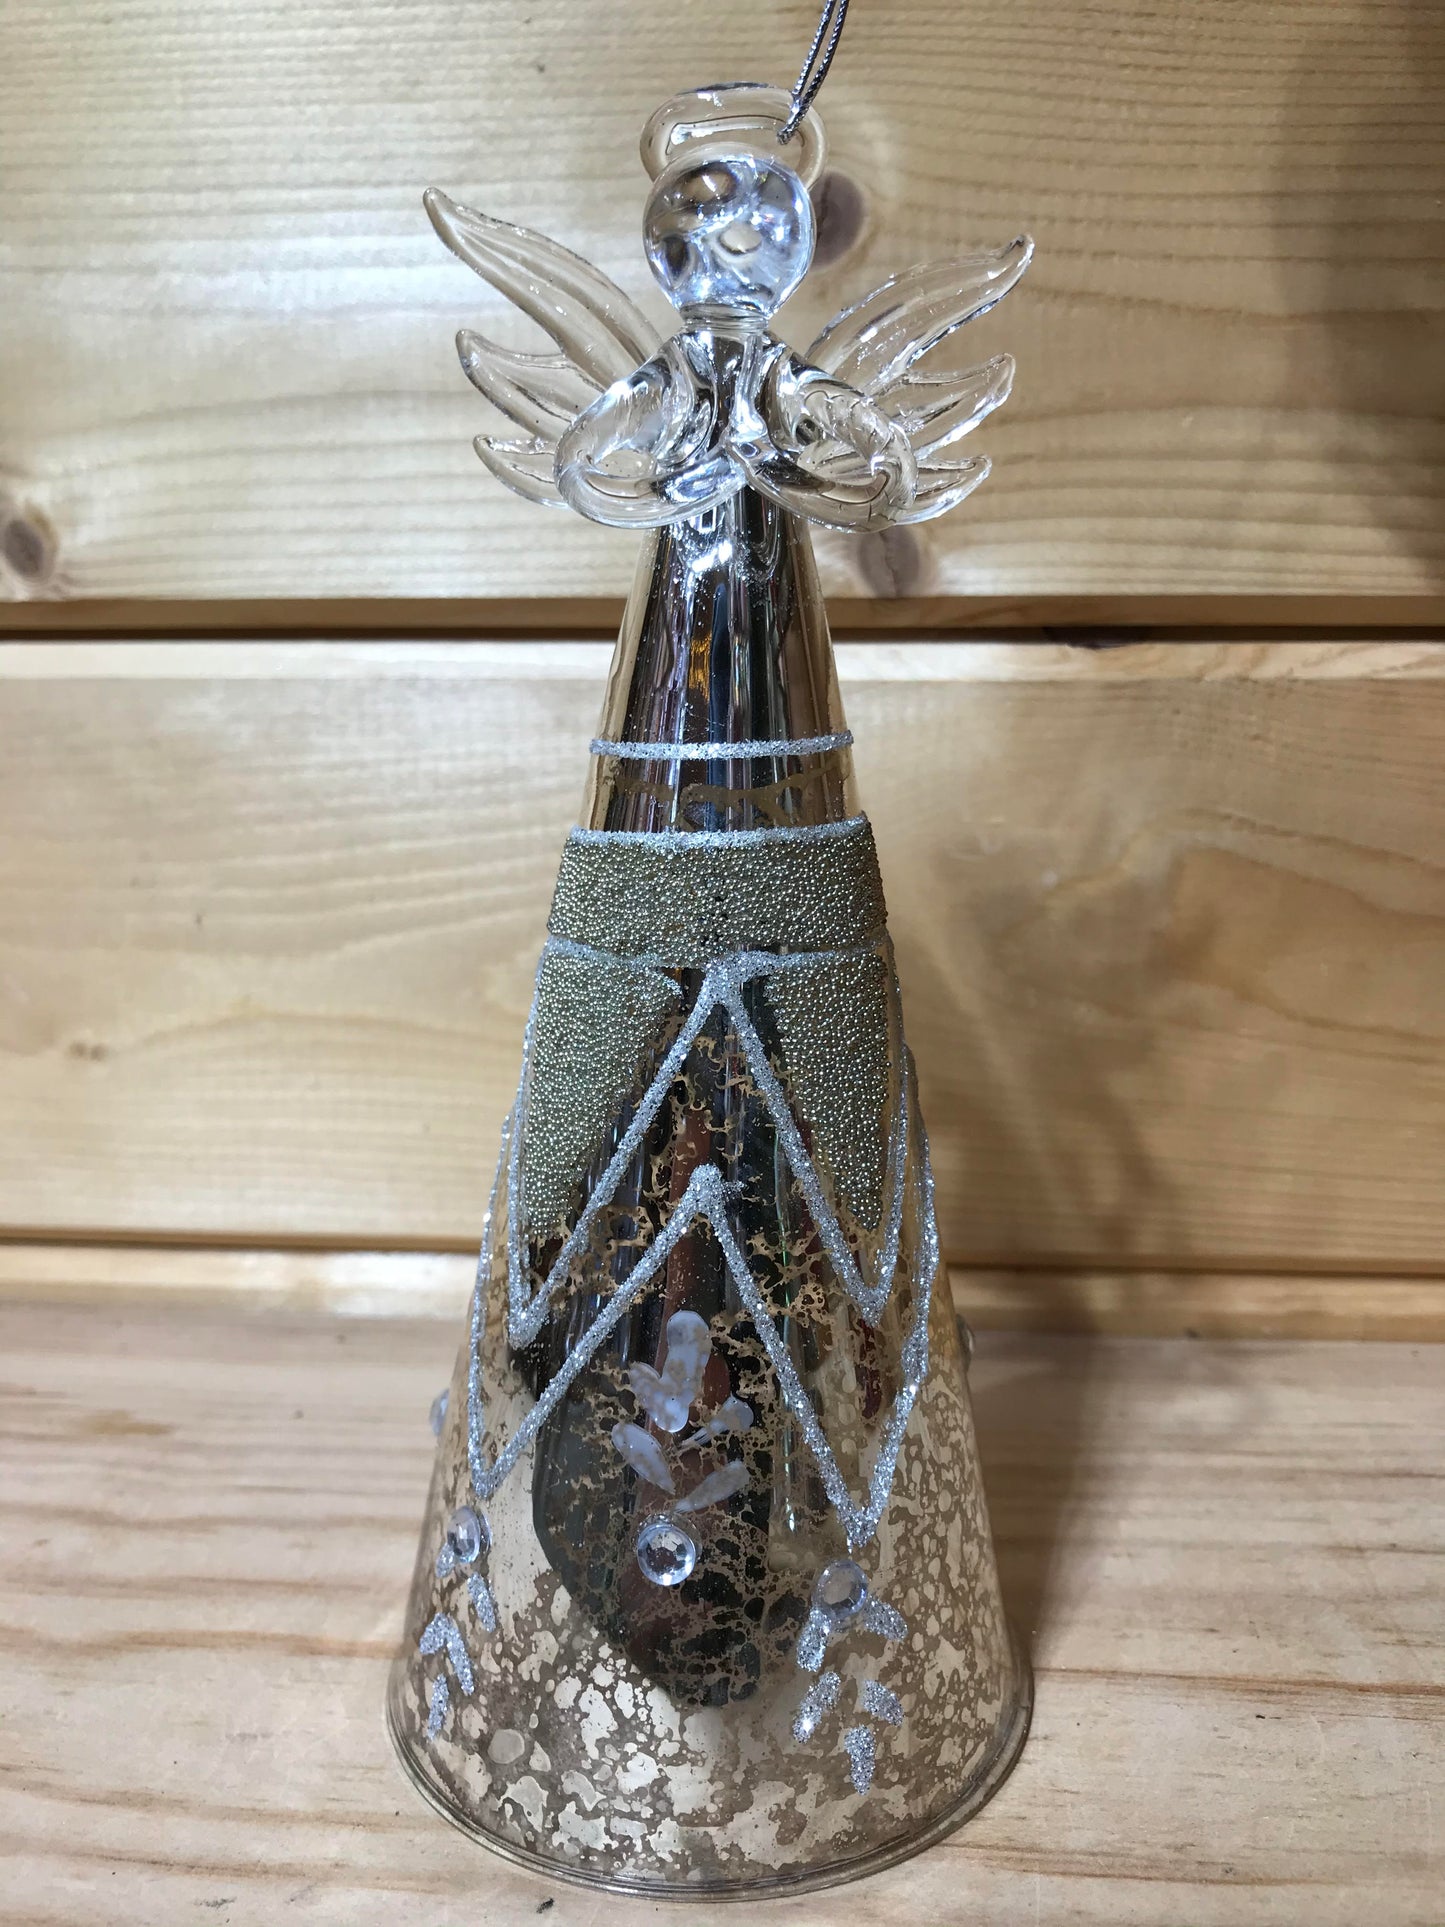 This stunning glass antique effect angel with clasped hands, decorated with beading and glitter bindis will be the perfect finishing touch to your Christmas tree!